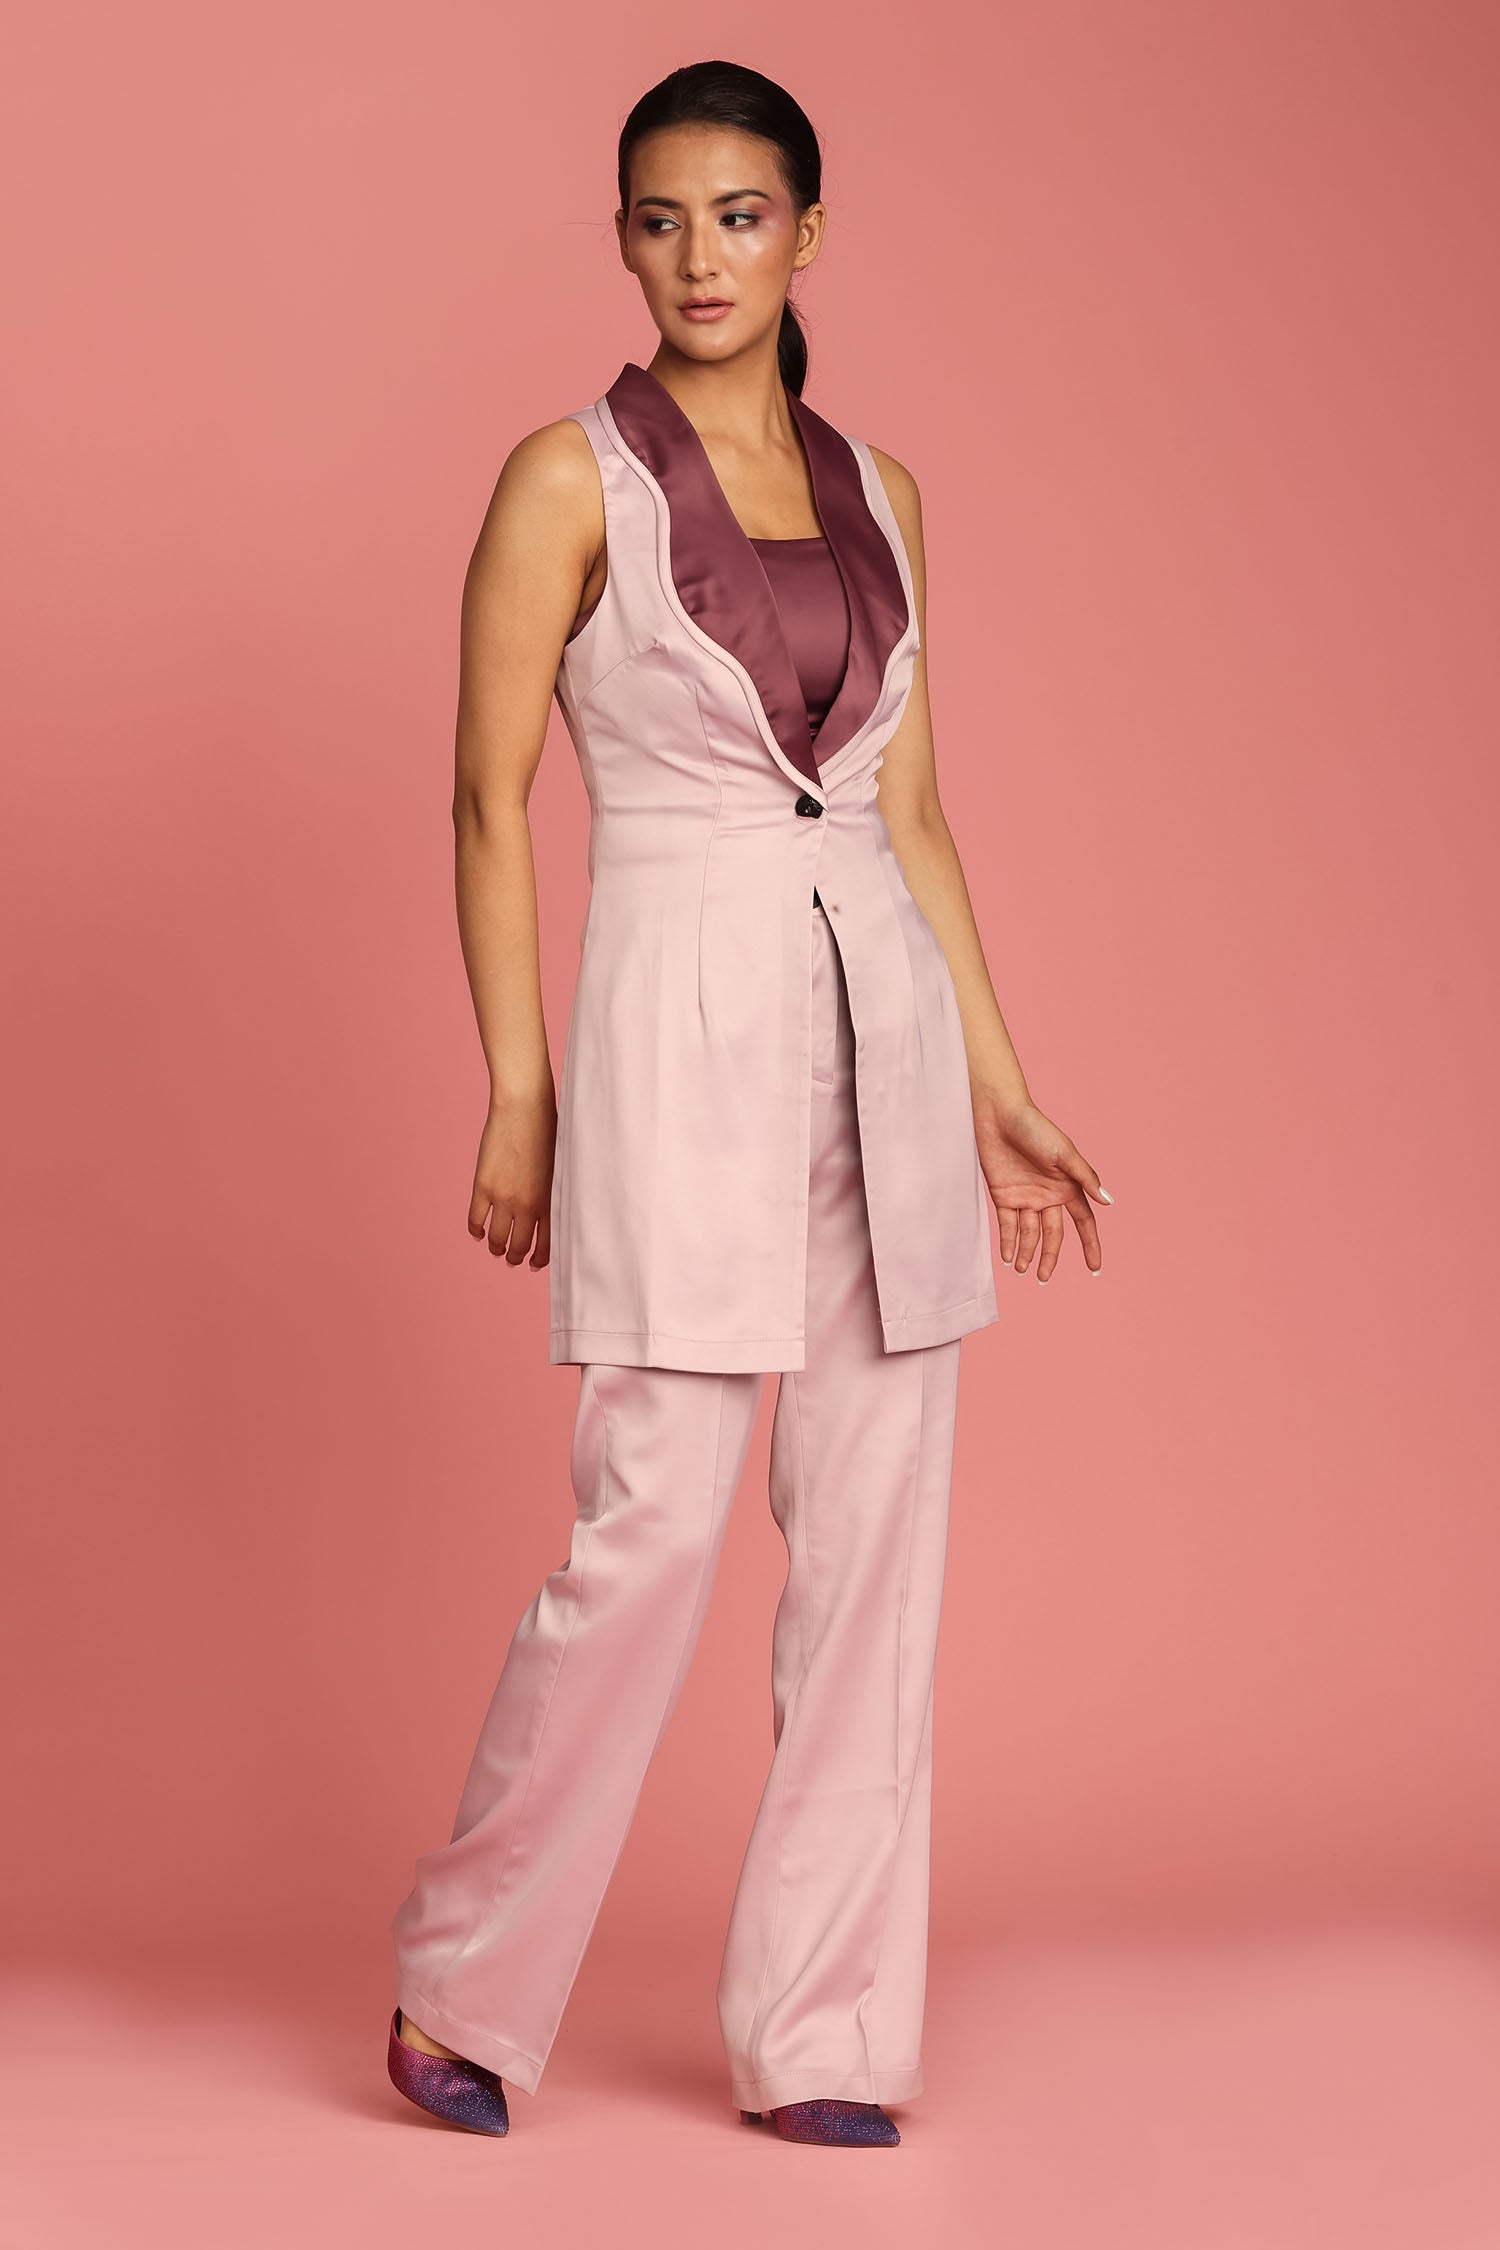 Bubble Gum Sleeveless Twilight Collar Blazer with Crop Top and Flared Pants